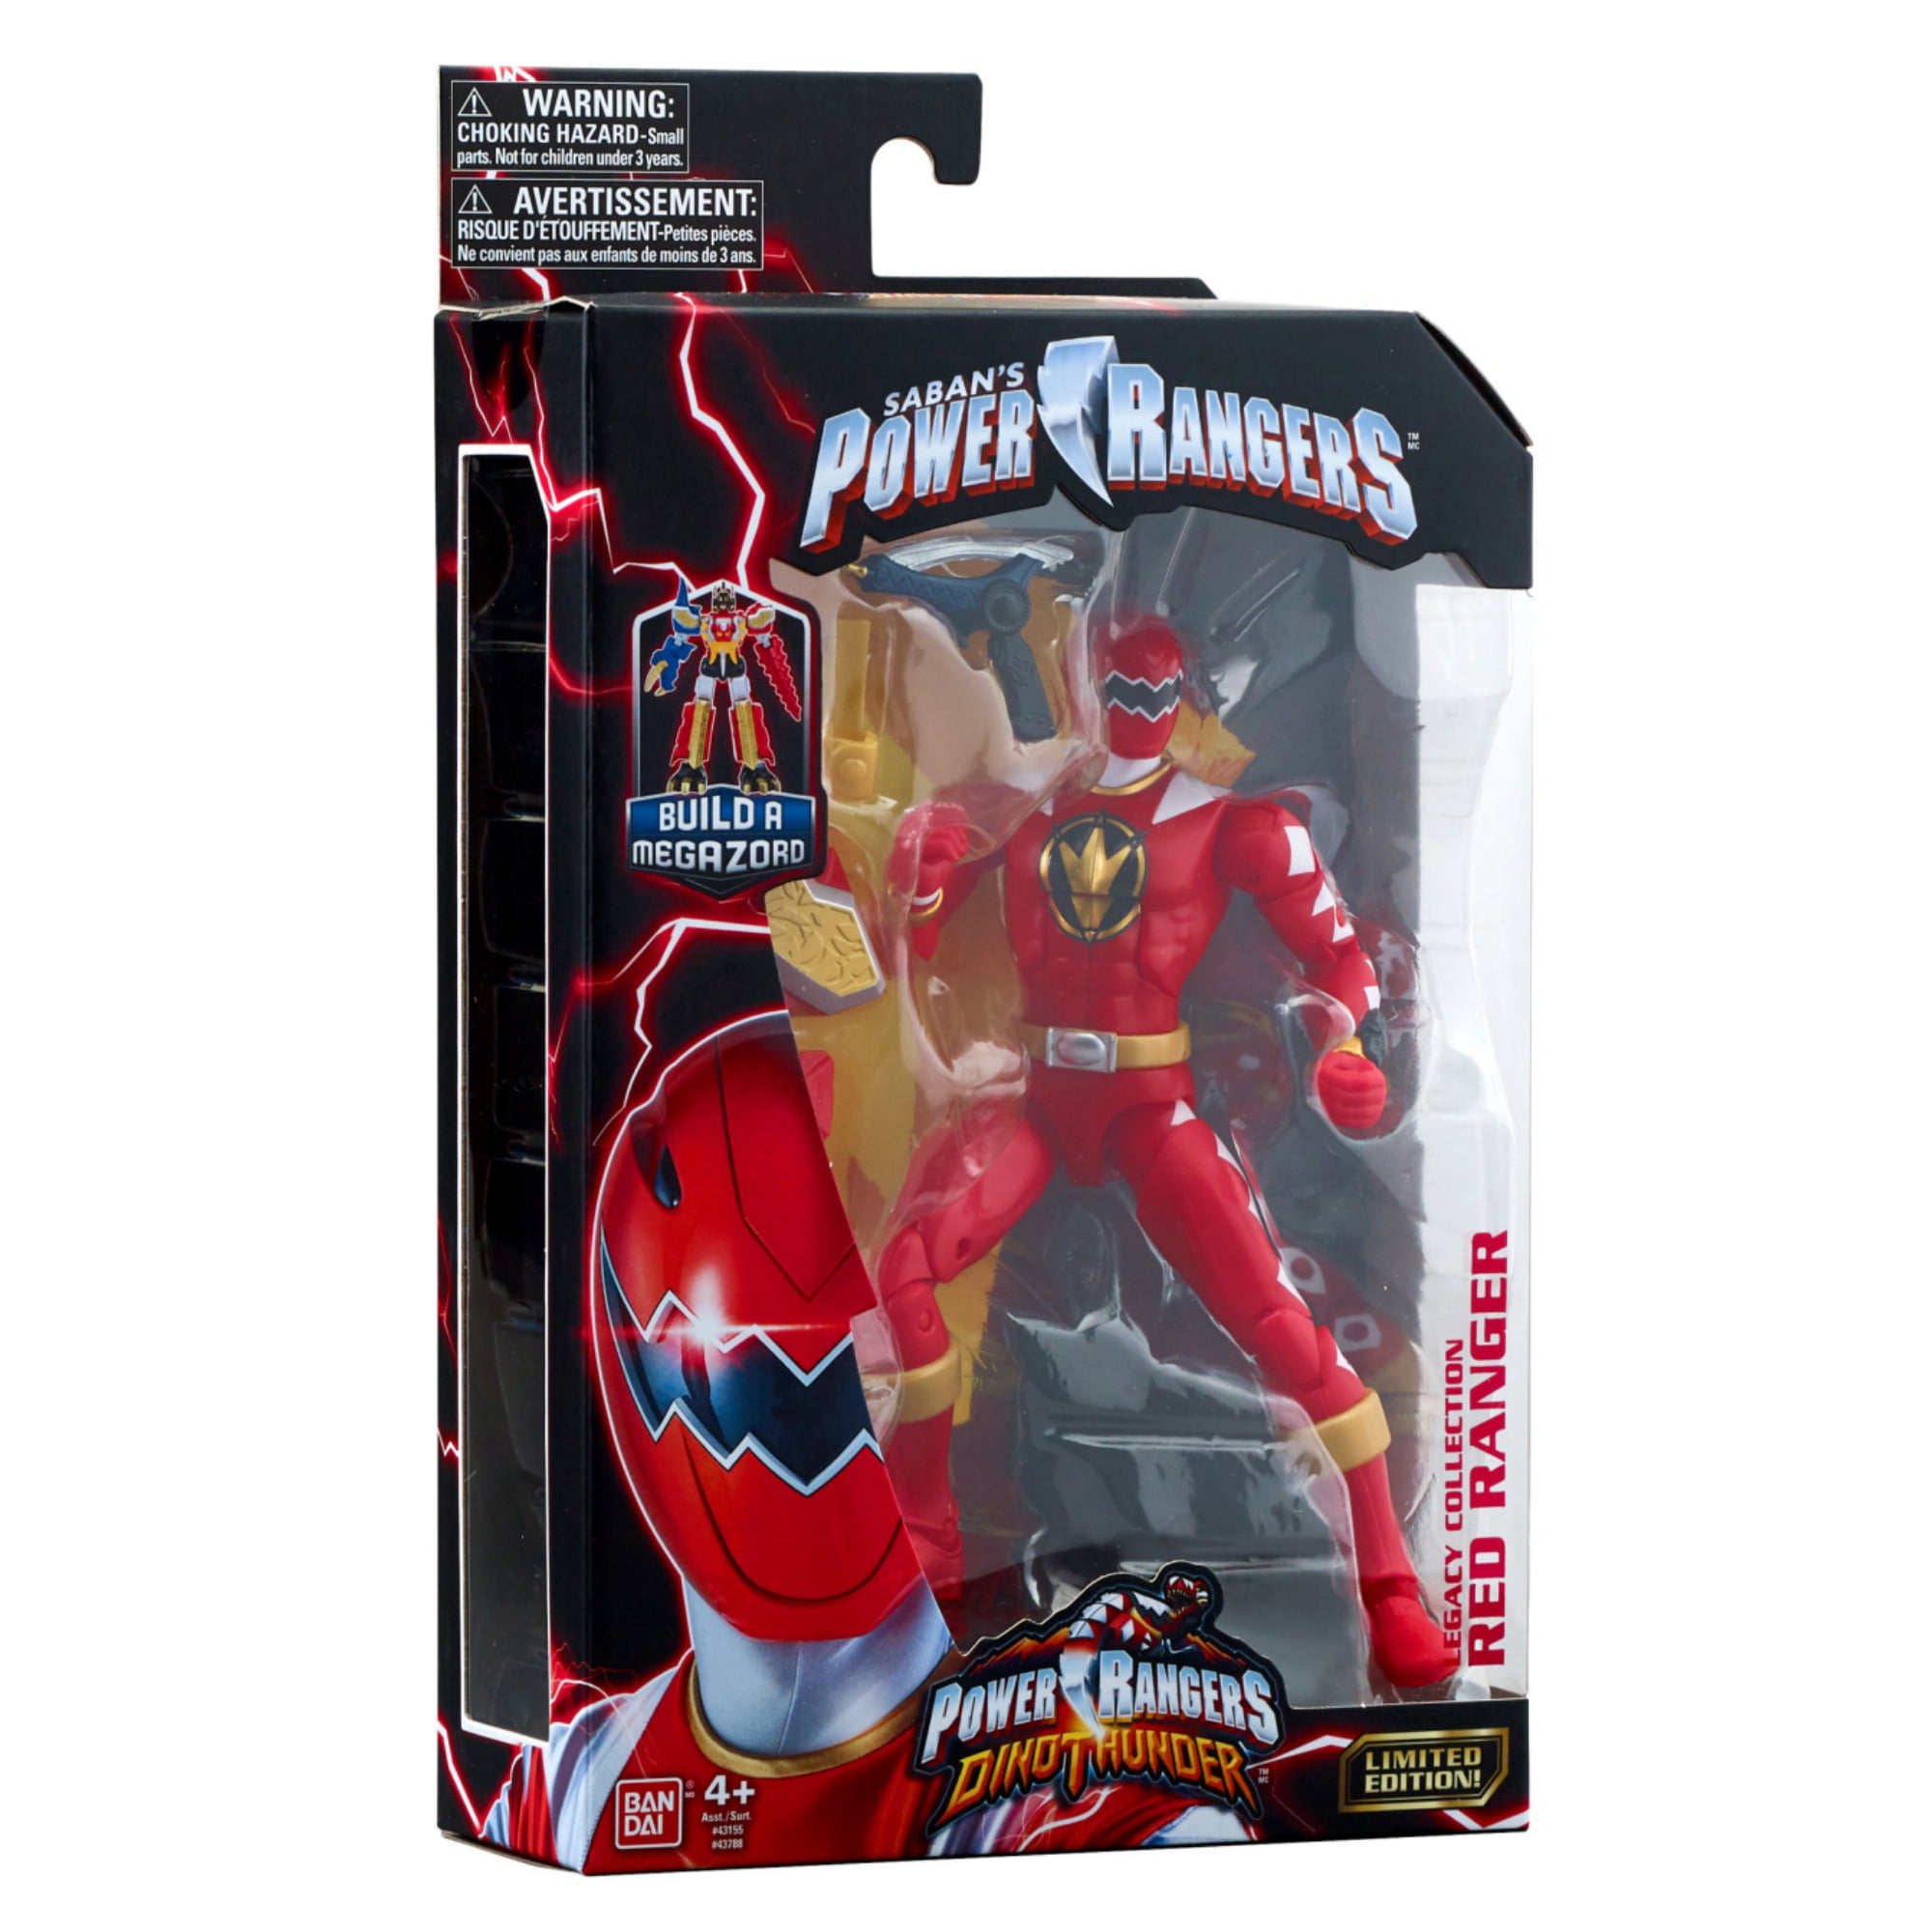 Bandai Power Rangers Legacy Collectable